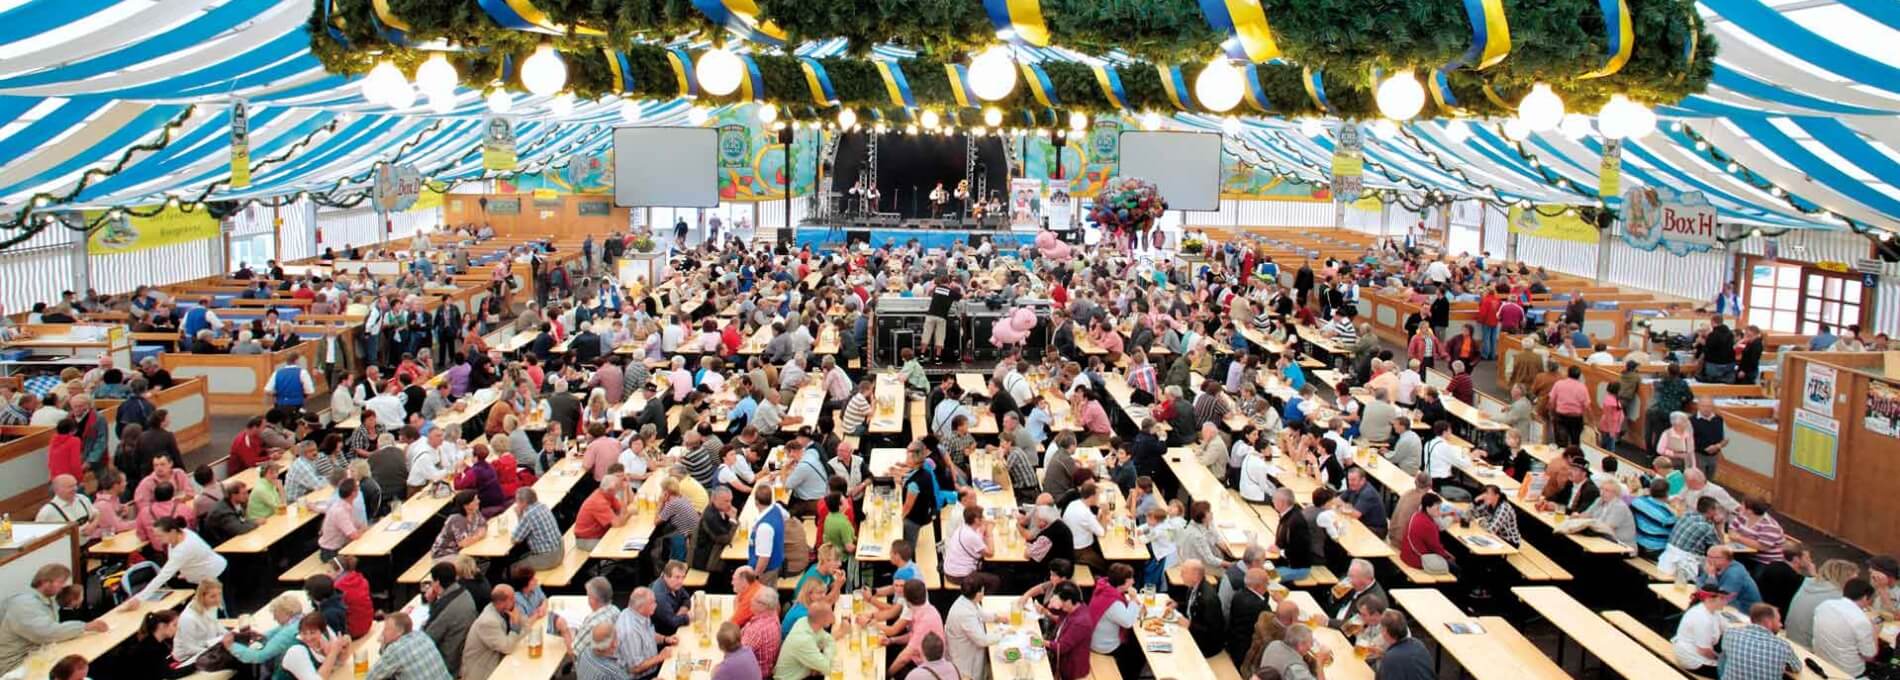 The classic beer garden table sets in natural color at Oktoberfest